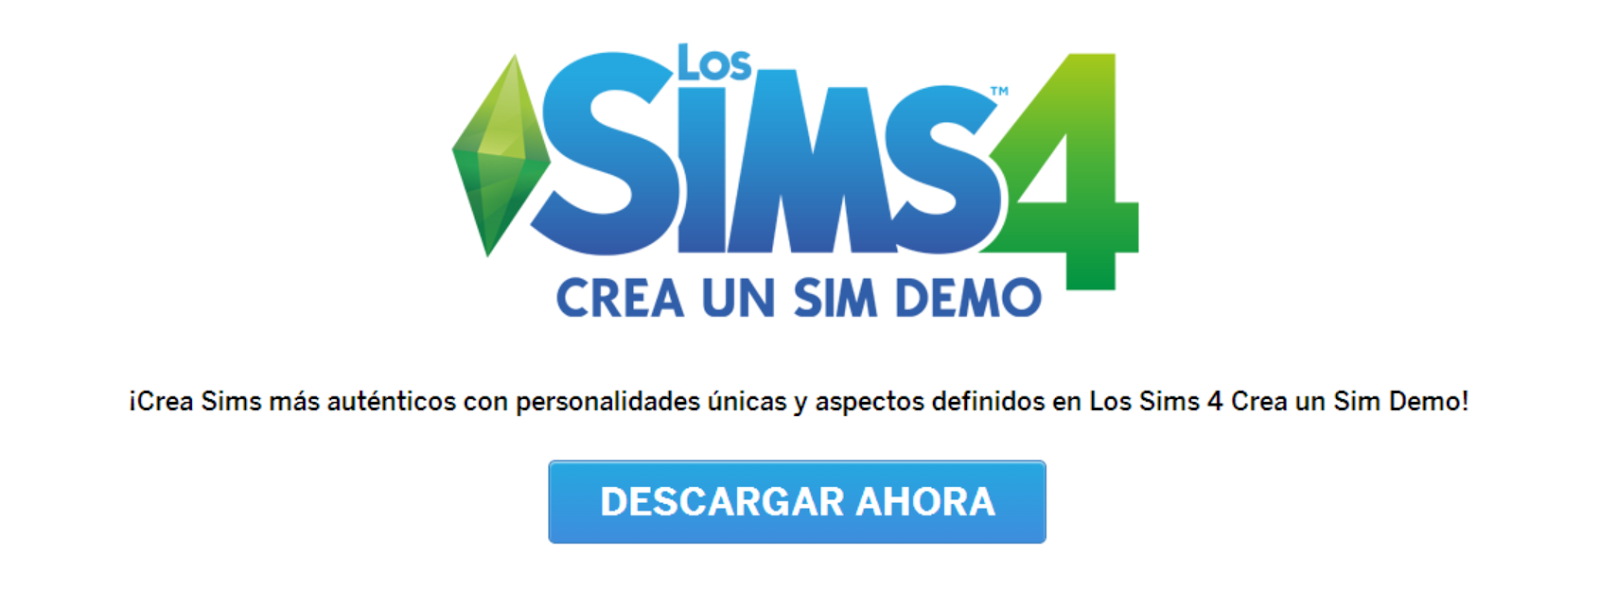 demo the sims 4